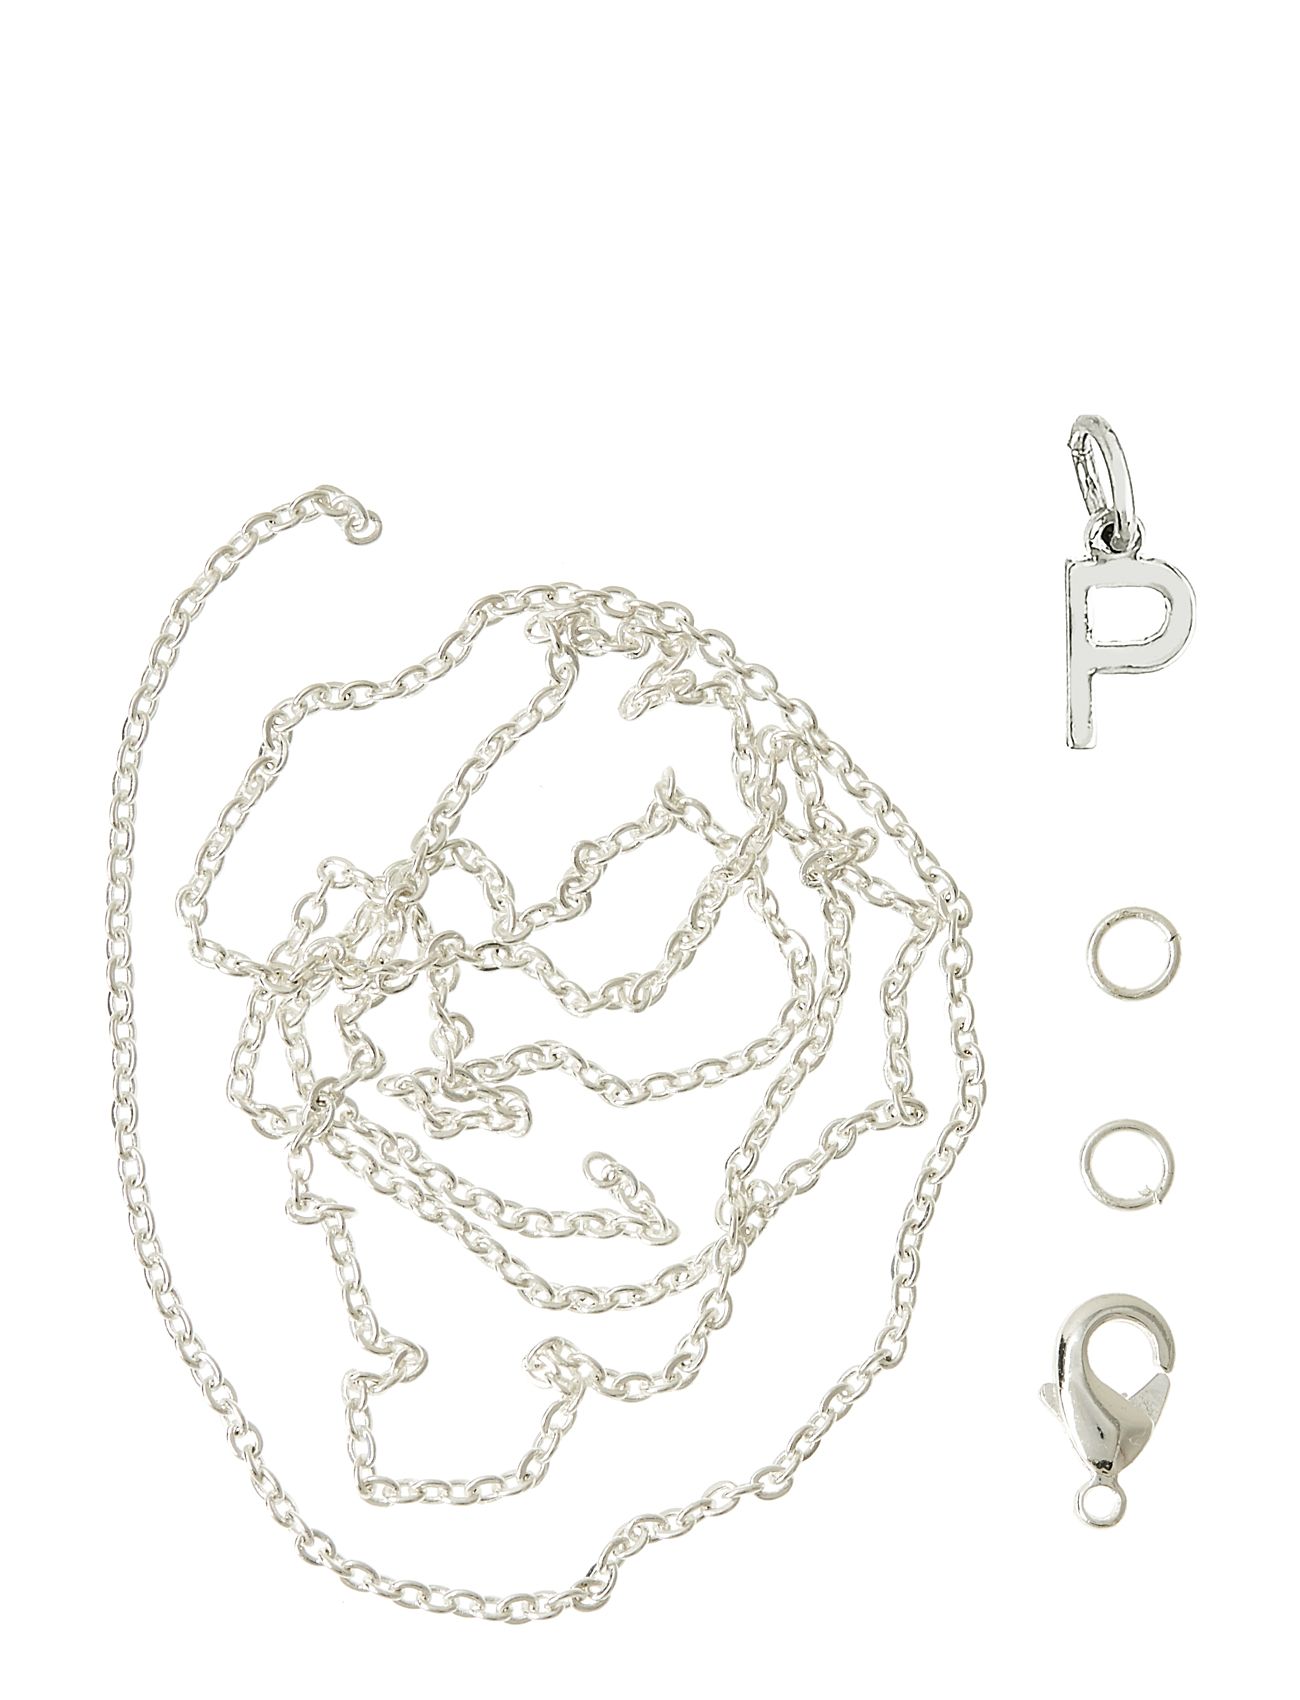 Letter P Sp With O-Ring, Chain And Clasp Toys Creativity Drawing & Crafts Craft Jewellery & Accessories Silver Me & My Box